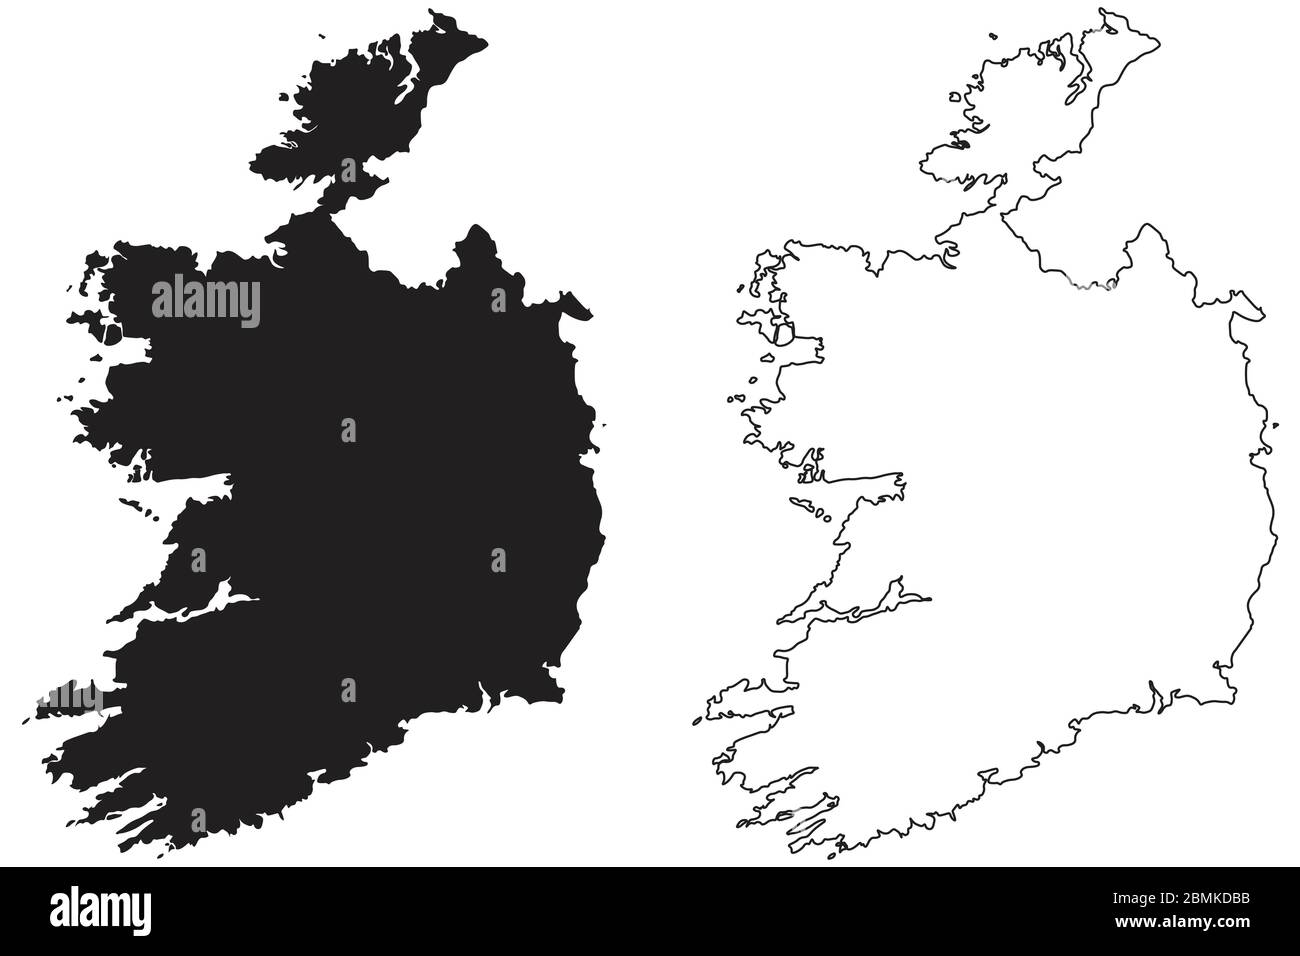 Ireland Country Map. Black silhouette and outline isolated on white background. EPS Vector Stock Vector